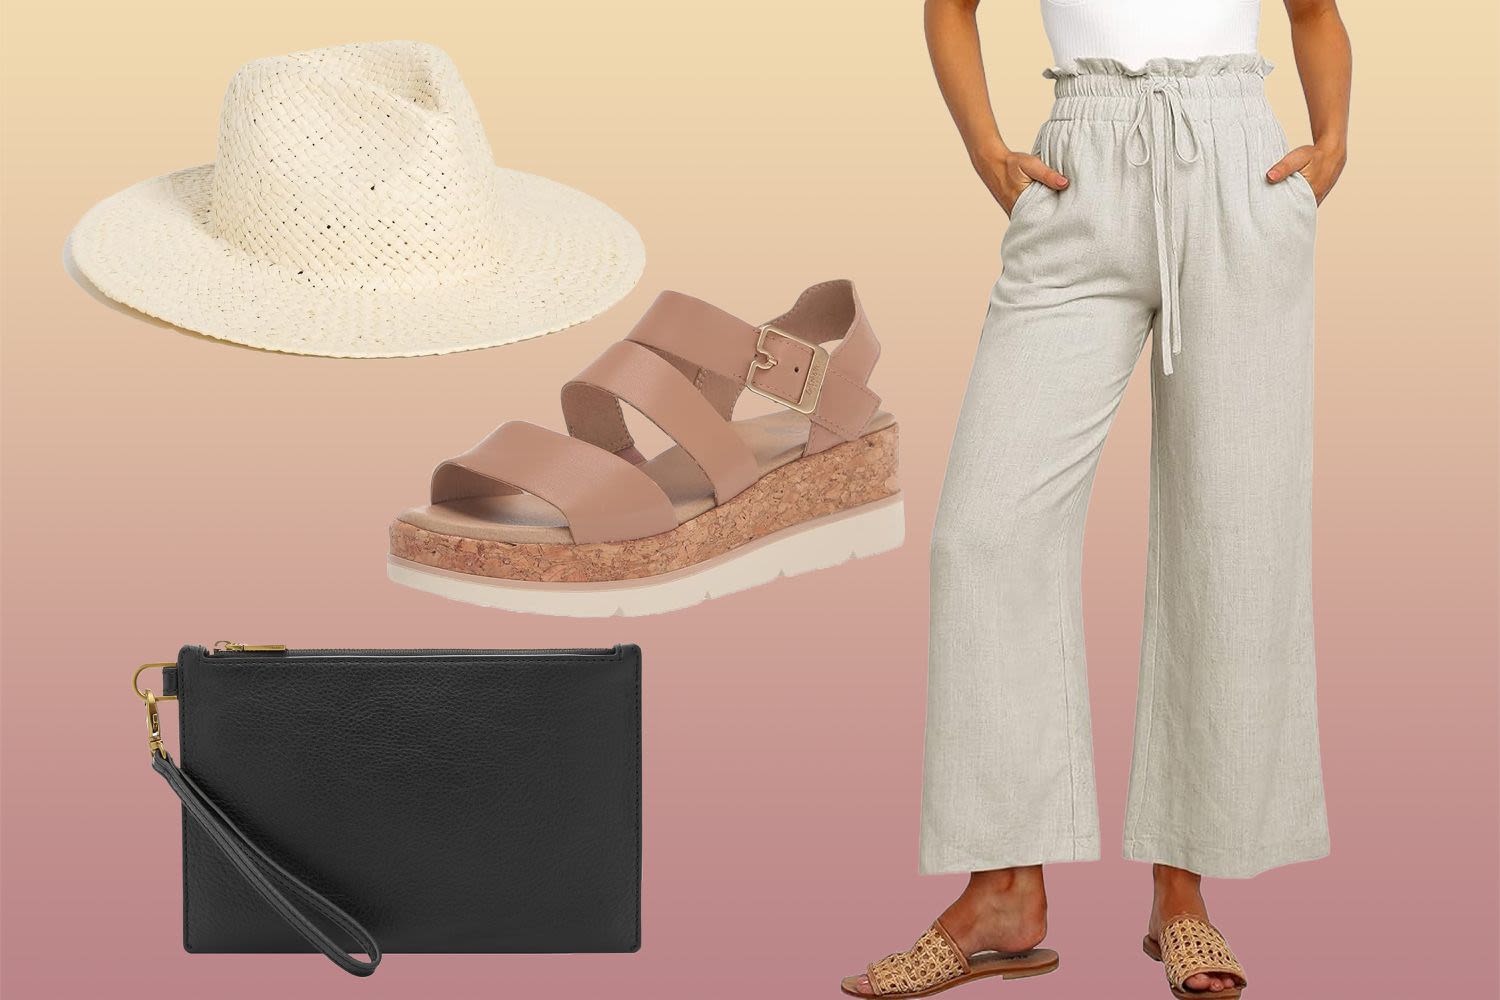 The 15 Best Summer Fashion Finds on Sale This Memorial Day at Amazon